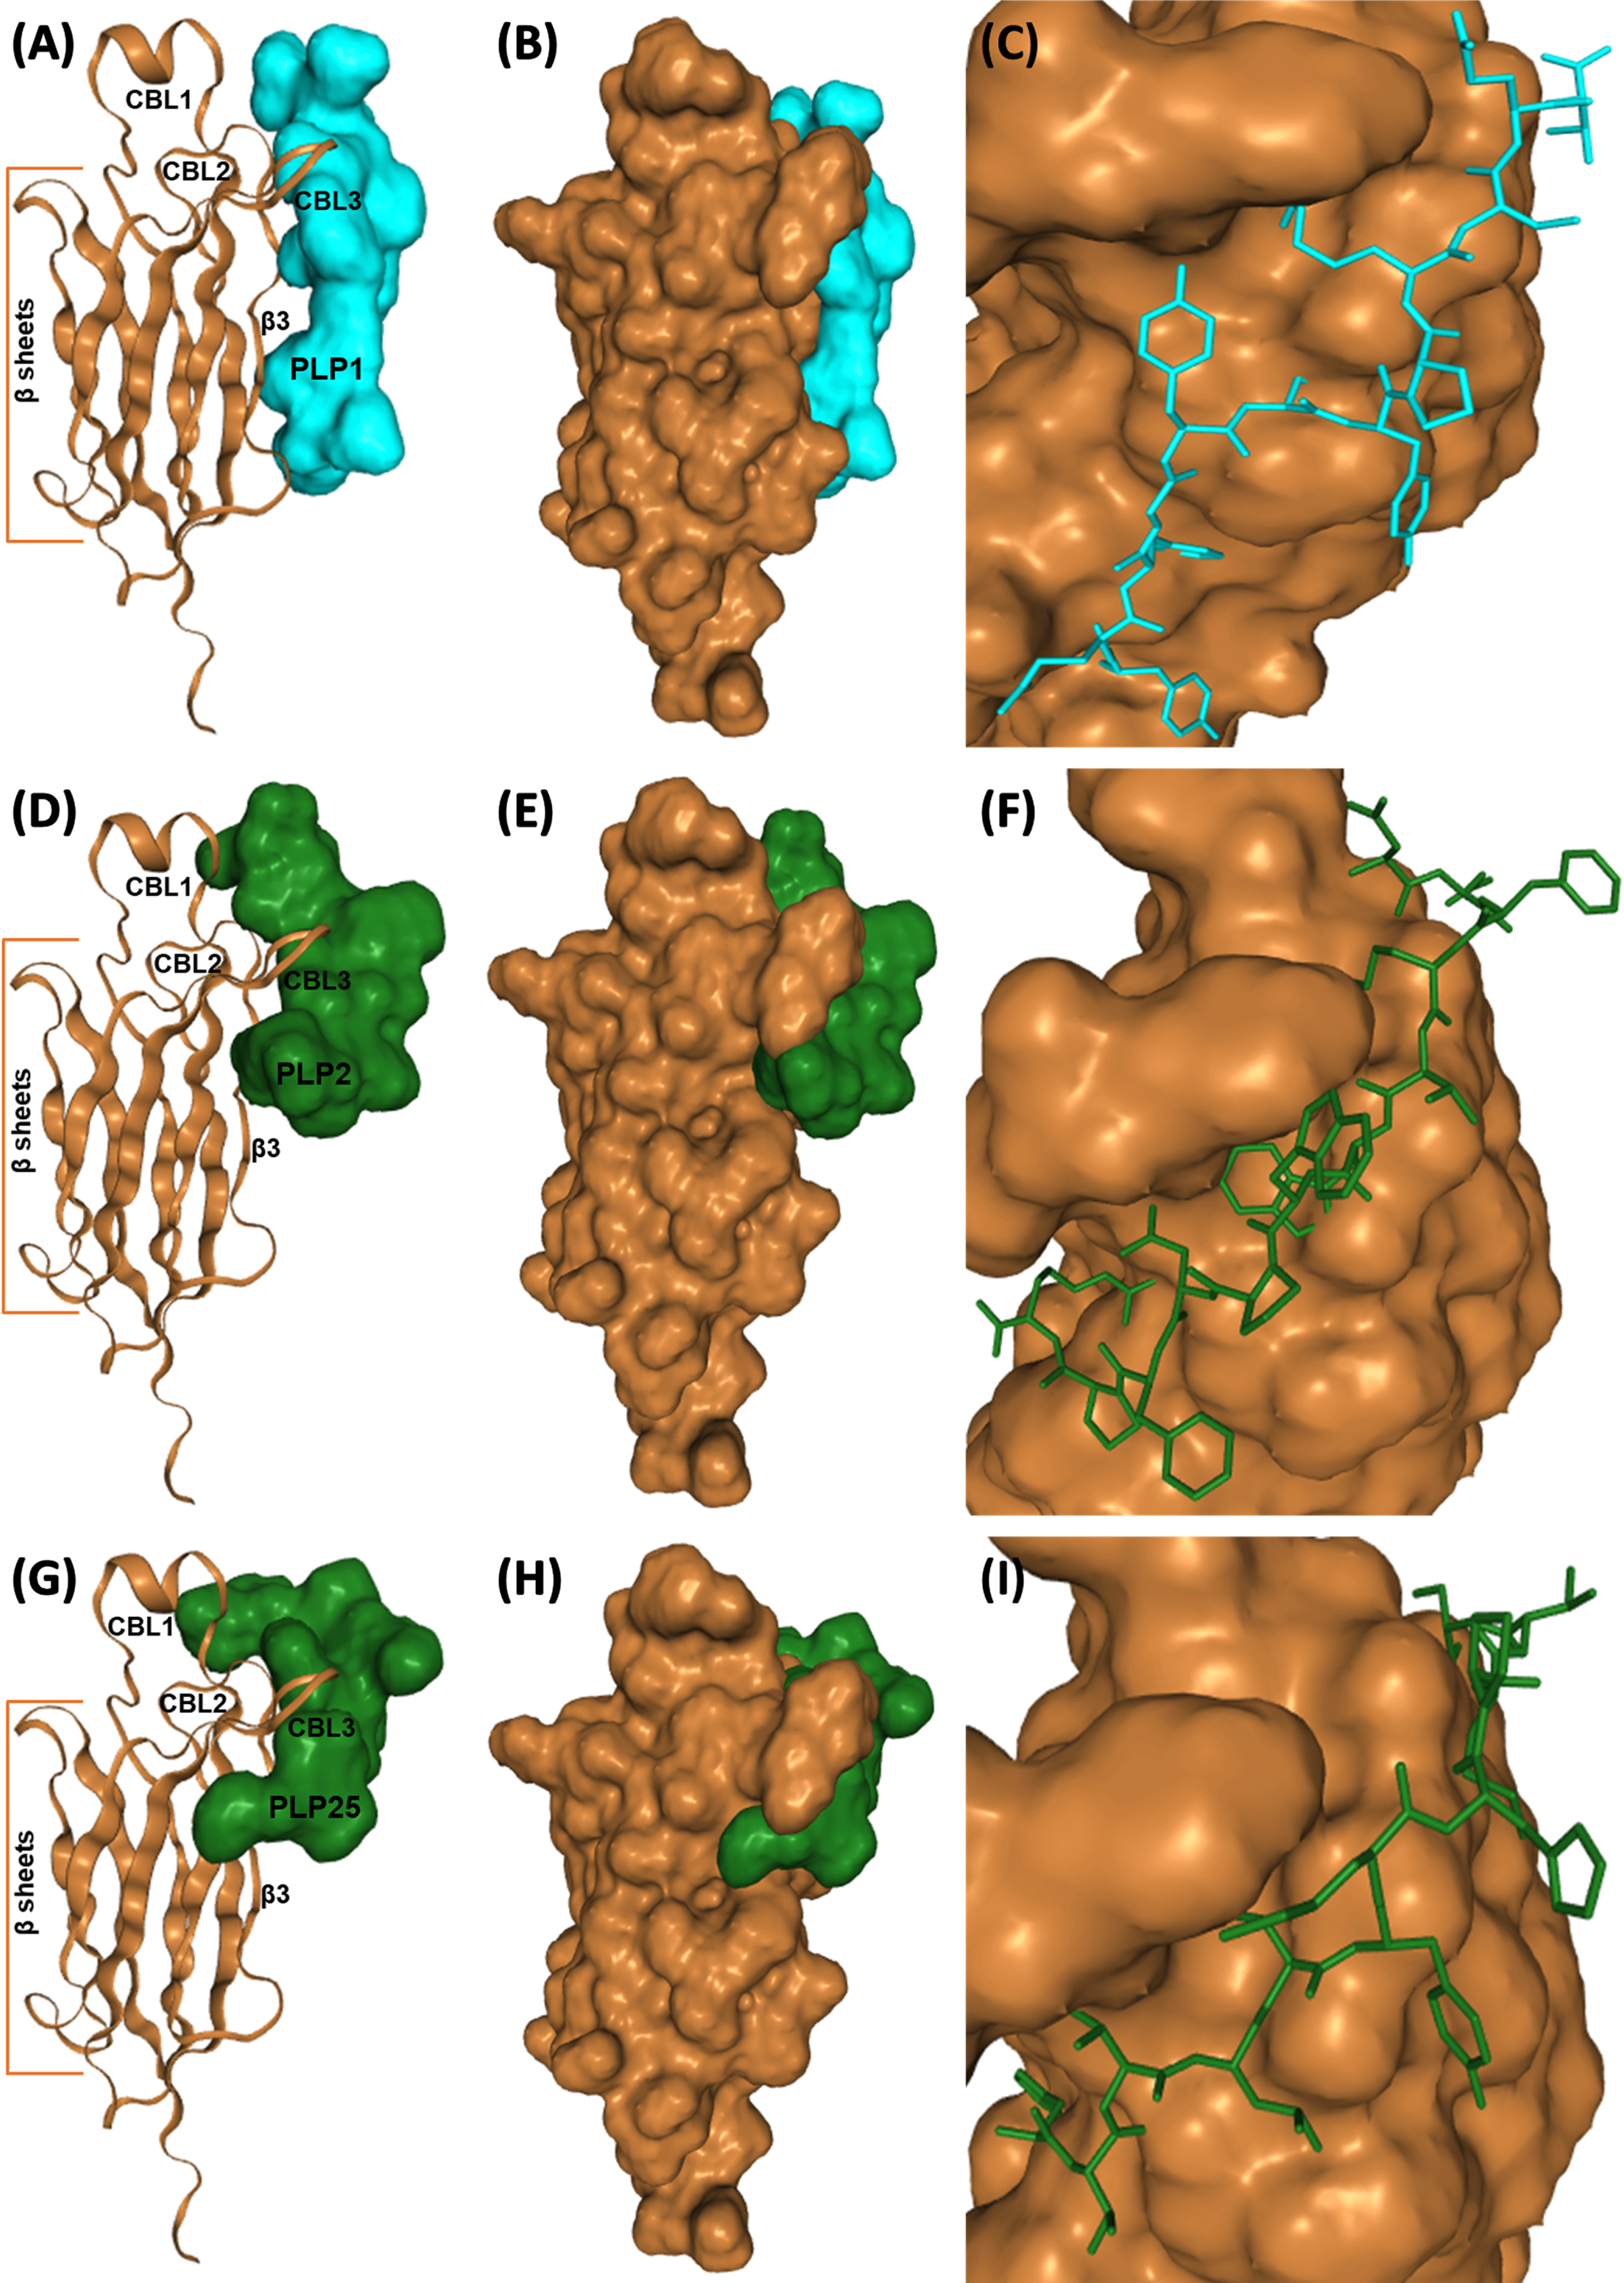 Interaction of PLP1 (A-C), PLP2 (D–F), and PLP25 (G–I) with C2-cPLA2-IVA predicted by the HPEPDOCK software. C2-cPLA2-IVA appears in brown, PLP1 in cyan, PLP2 and PLP25 in green (colors are depending on the chosen model).